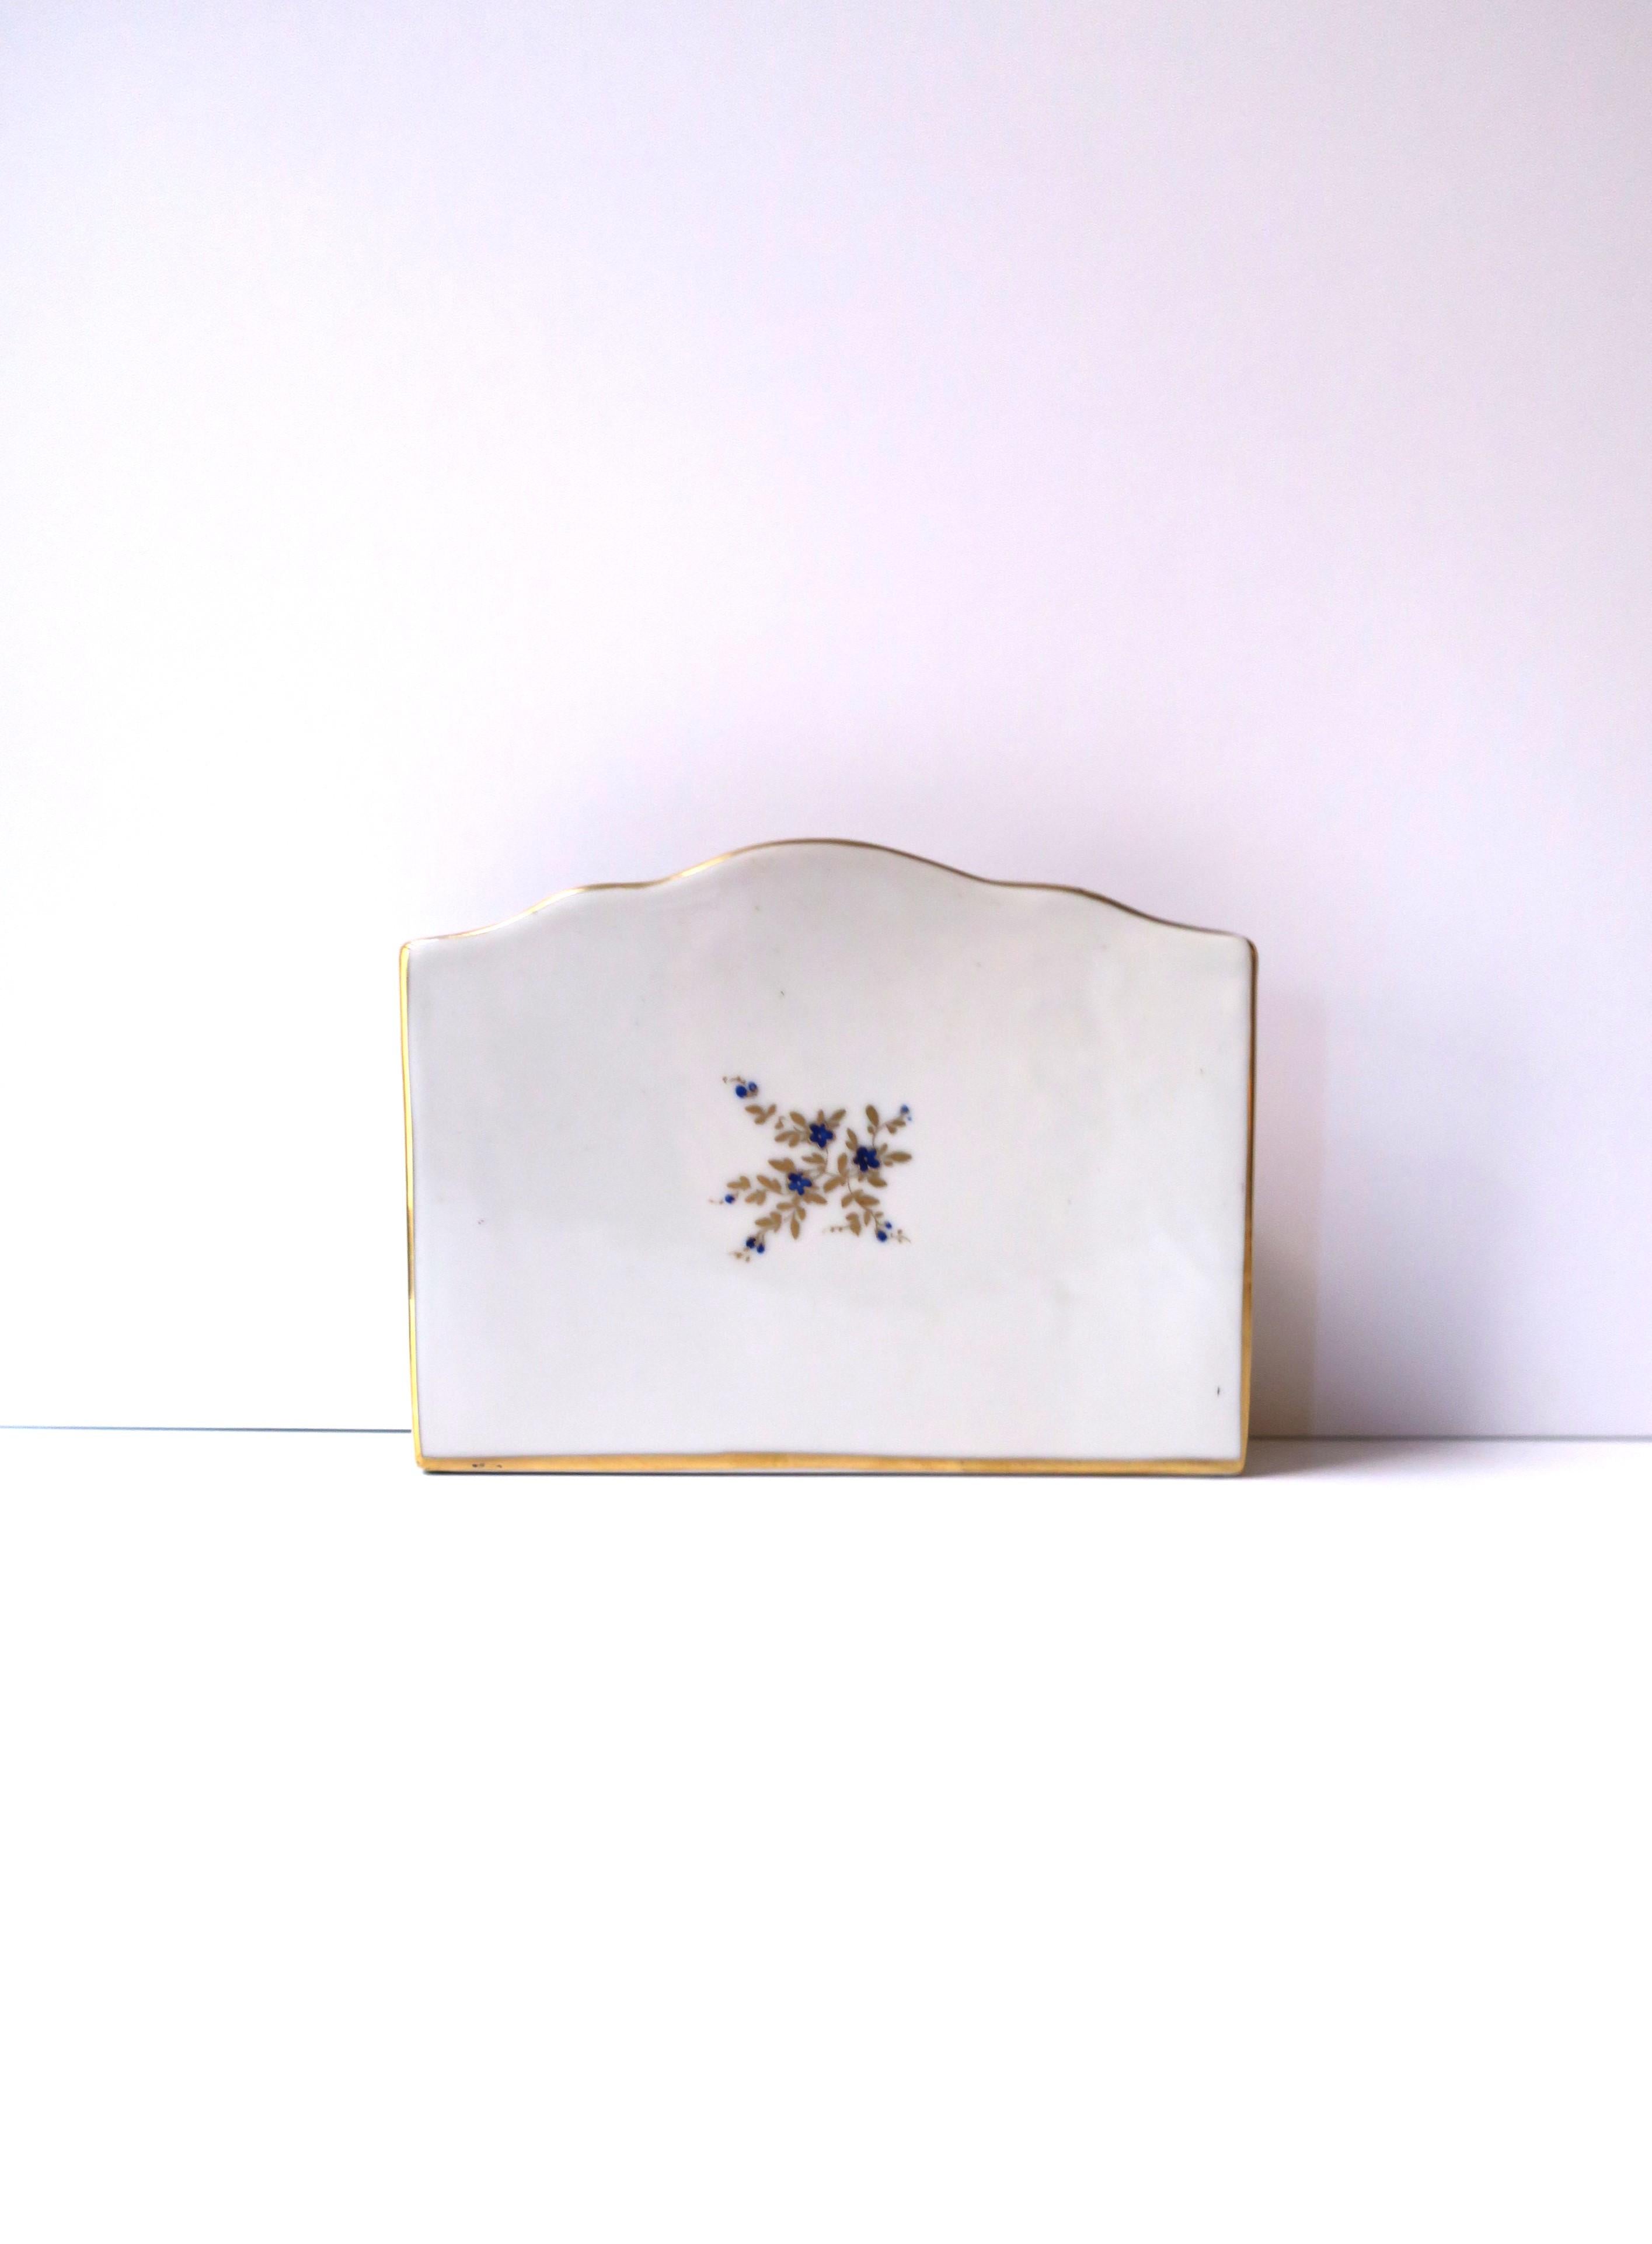 French Blue Gold and White Porcelain Desk Letter Mail Holder from Paris For Sale 4